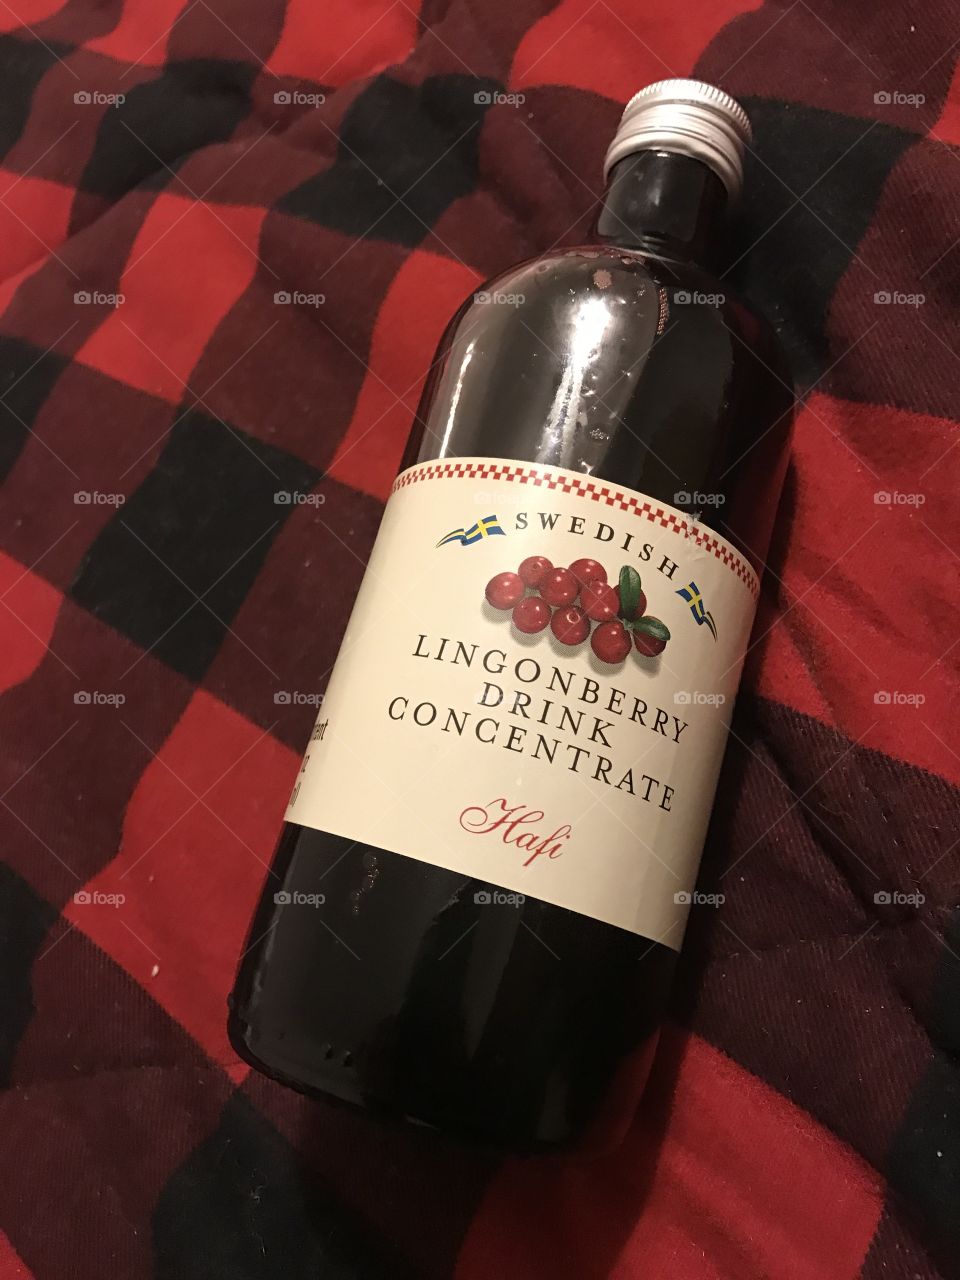 Lingonberry drink concentrate. It looks like a fine wine, but there’s no alcohol involved here! Straight from Sweden, this berry juice packs a punch!